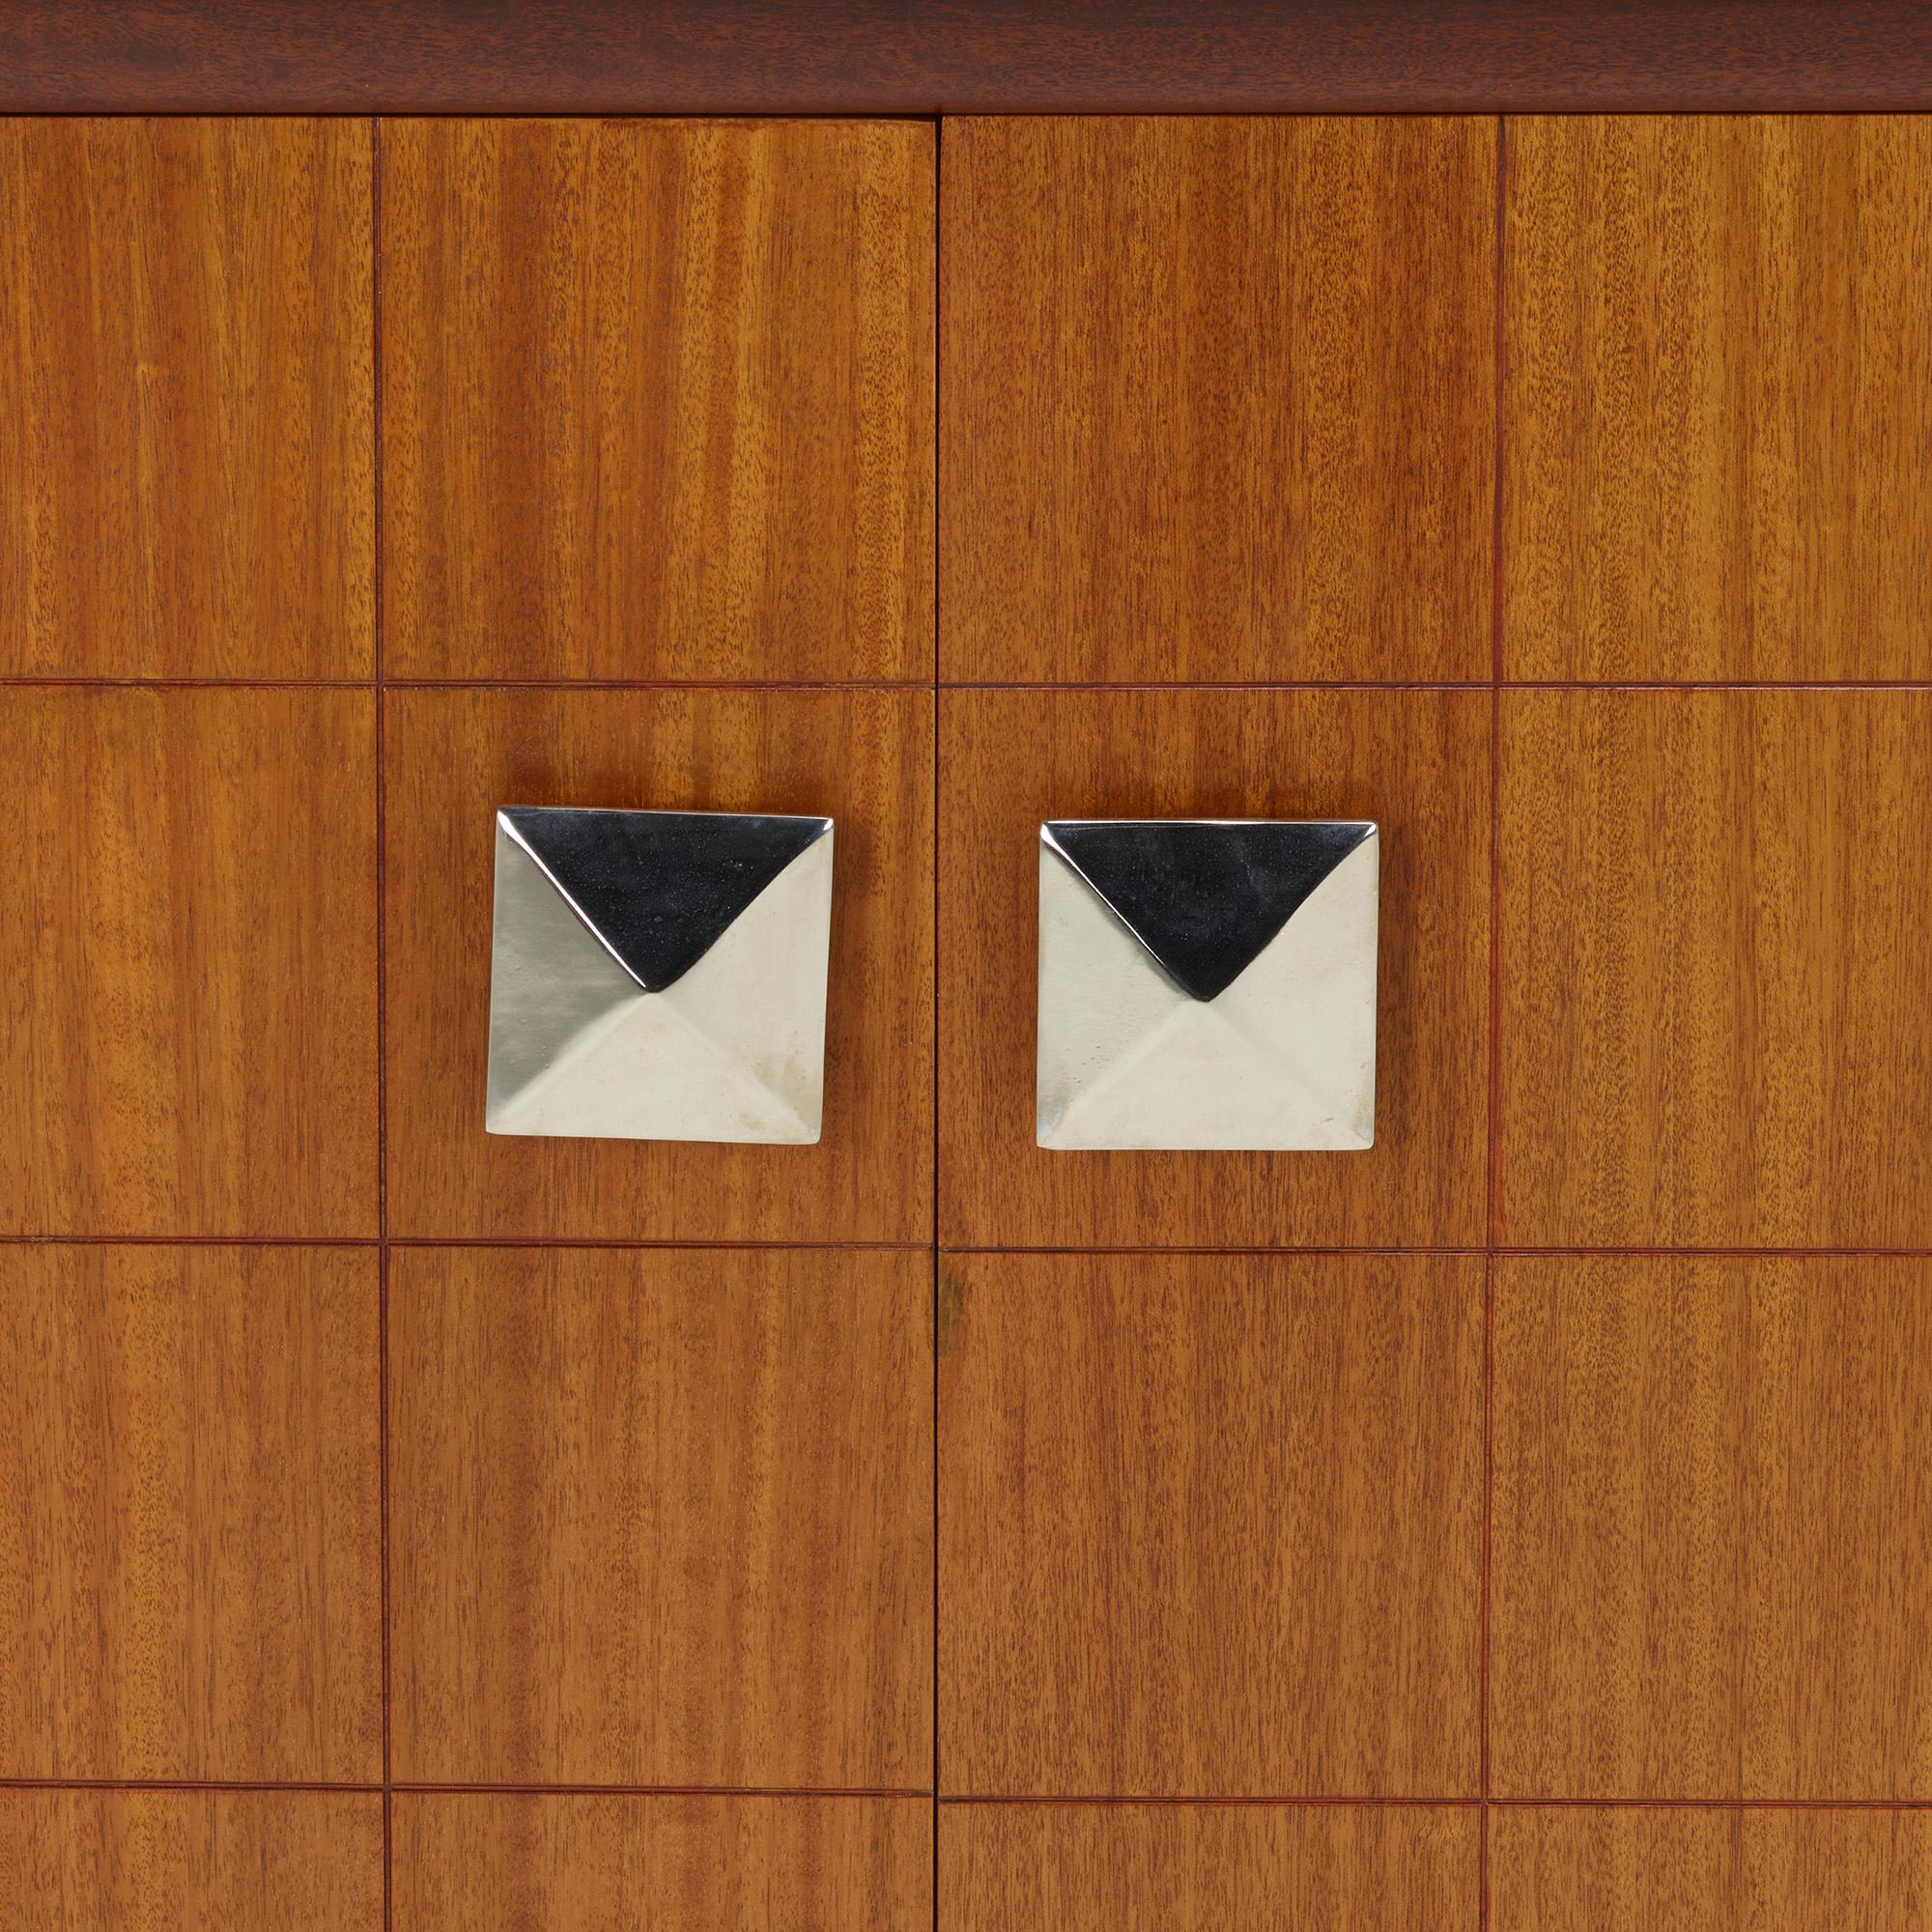 Mid-Century Modern Pair of Cabinets in the Manner of James Mont